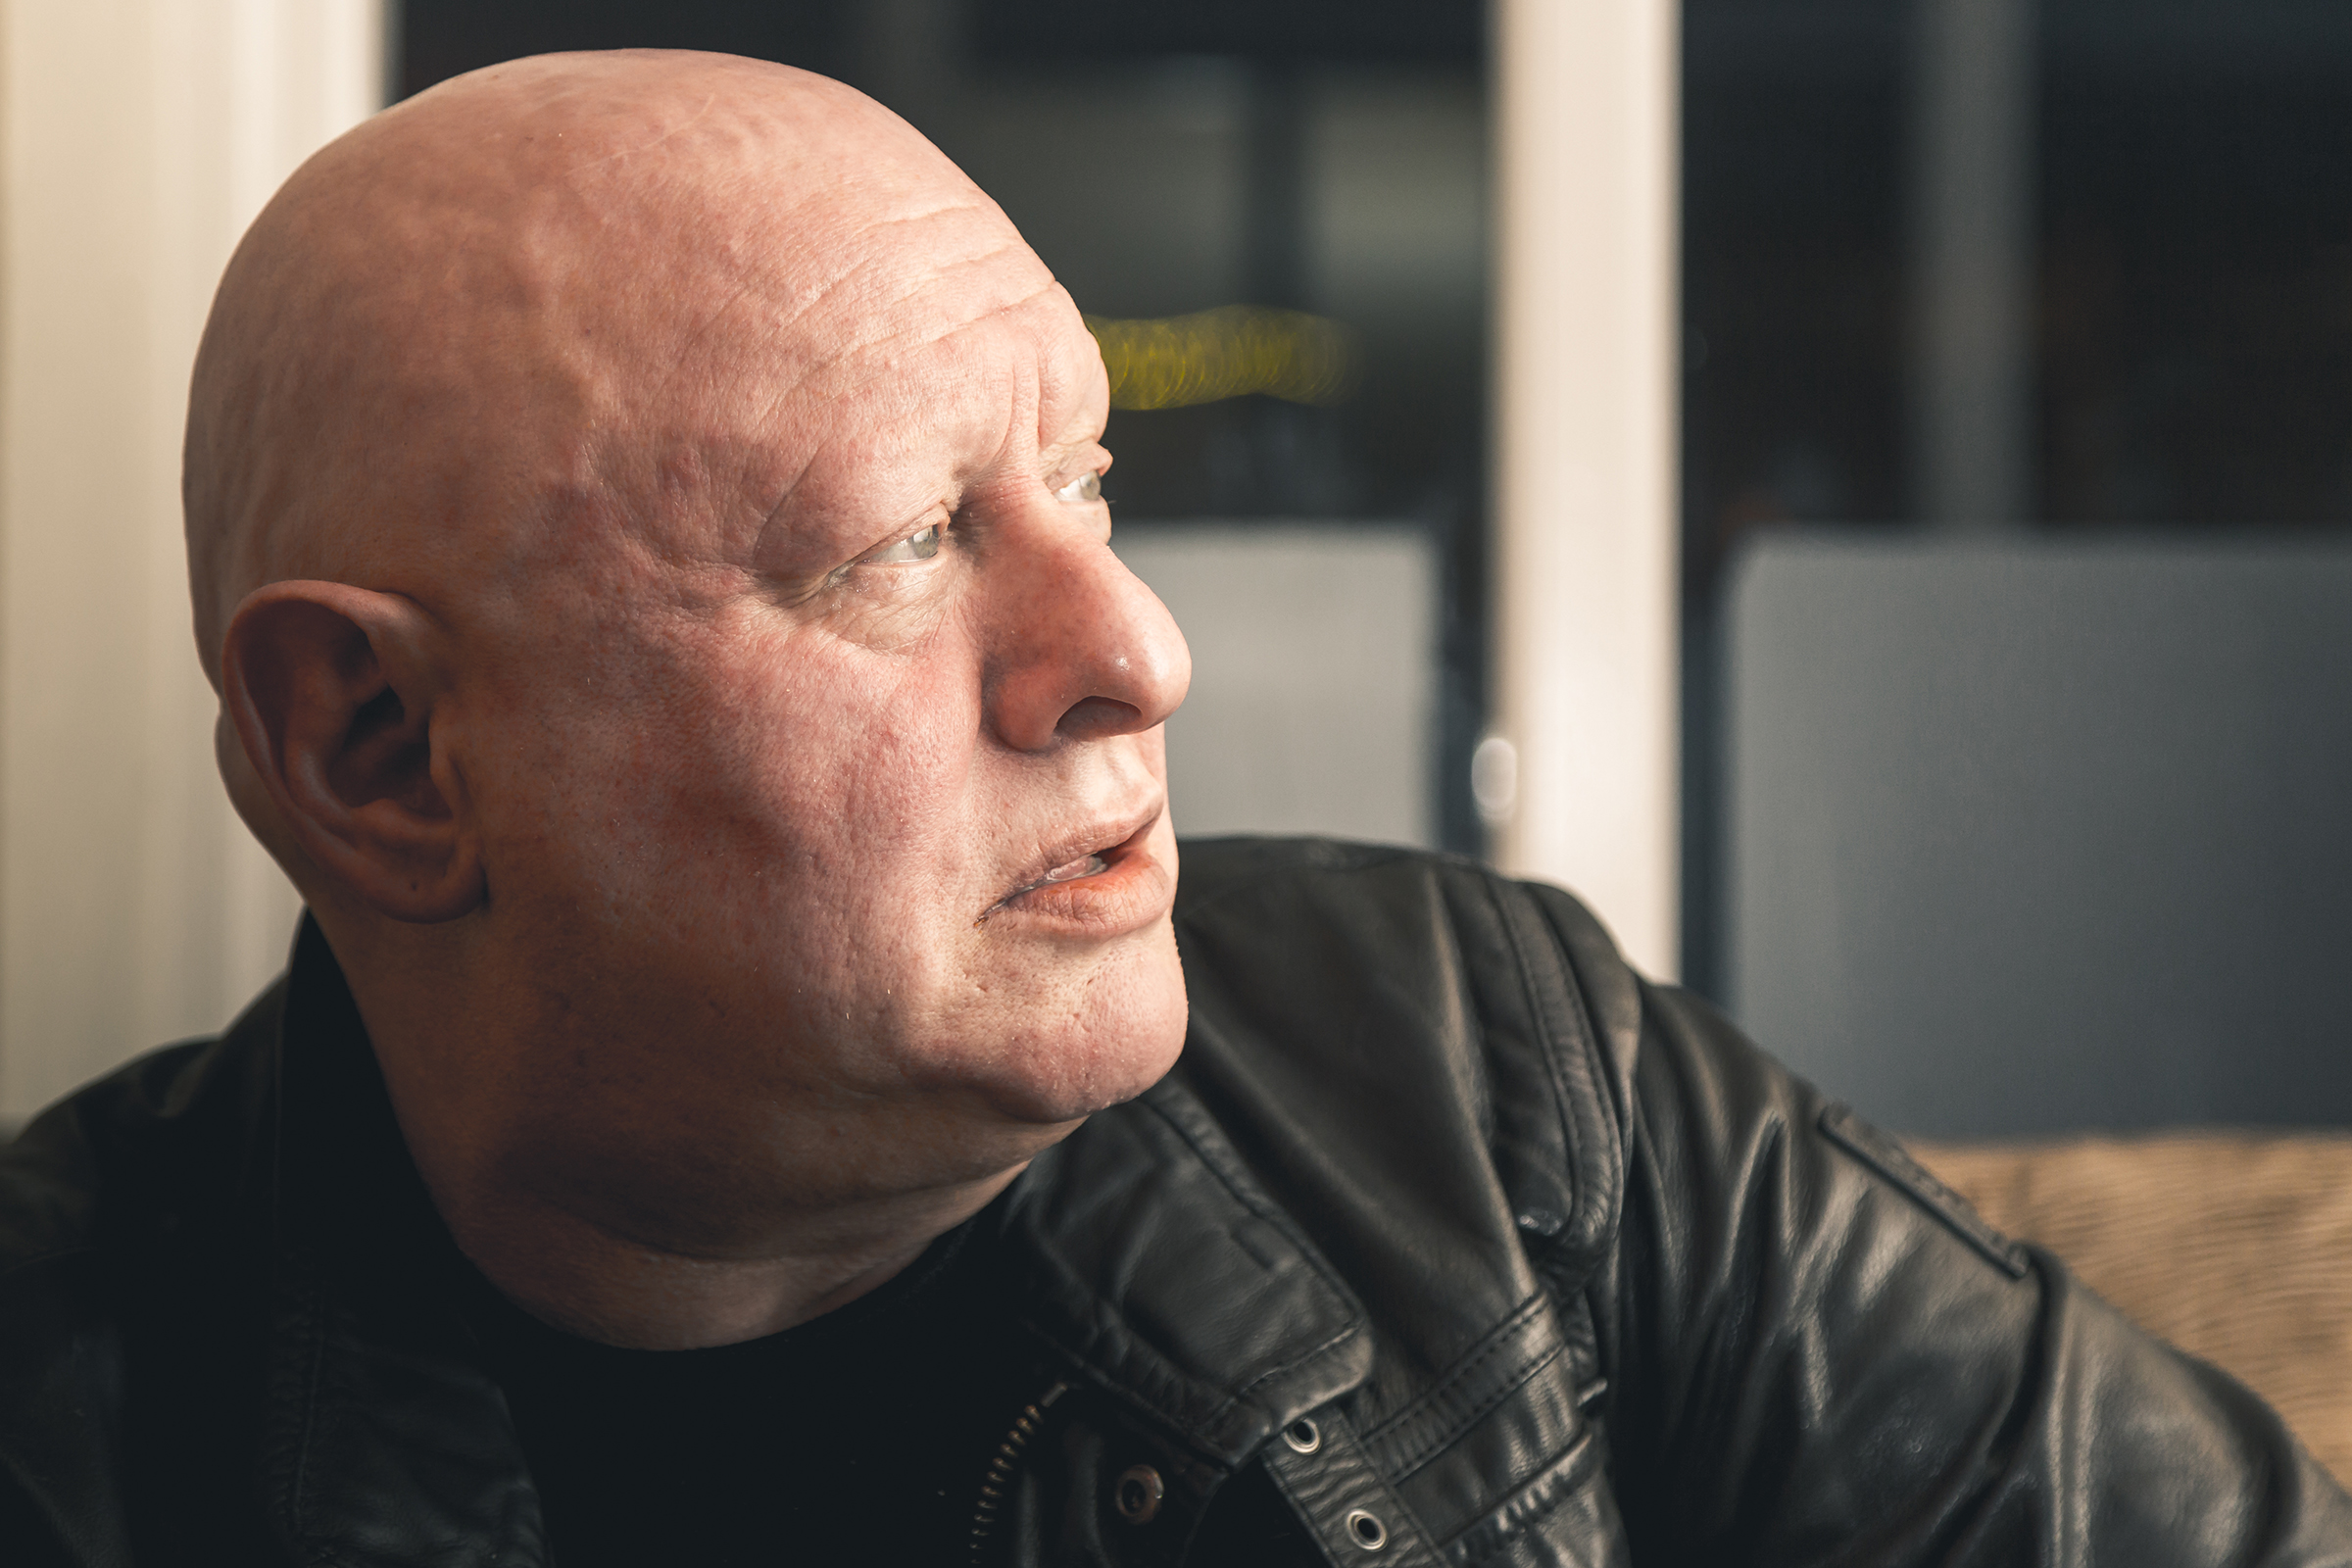 SHAUN RYDER announces new solo album ‘Visits From Future Technology’ - out August 20th 2